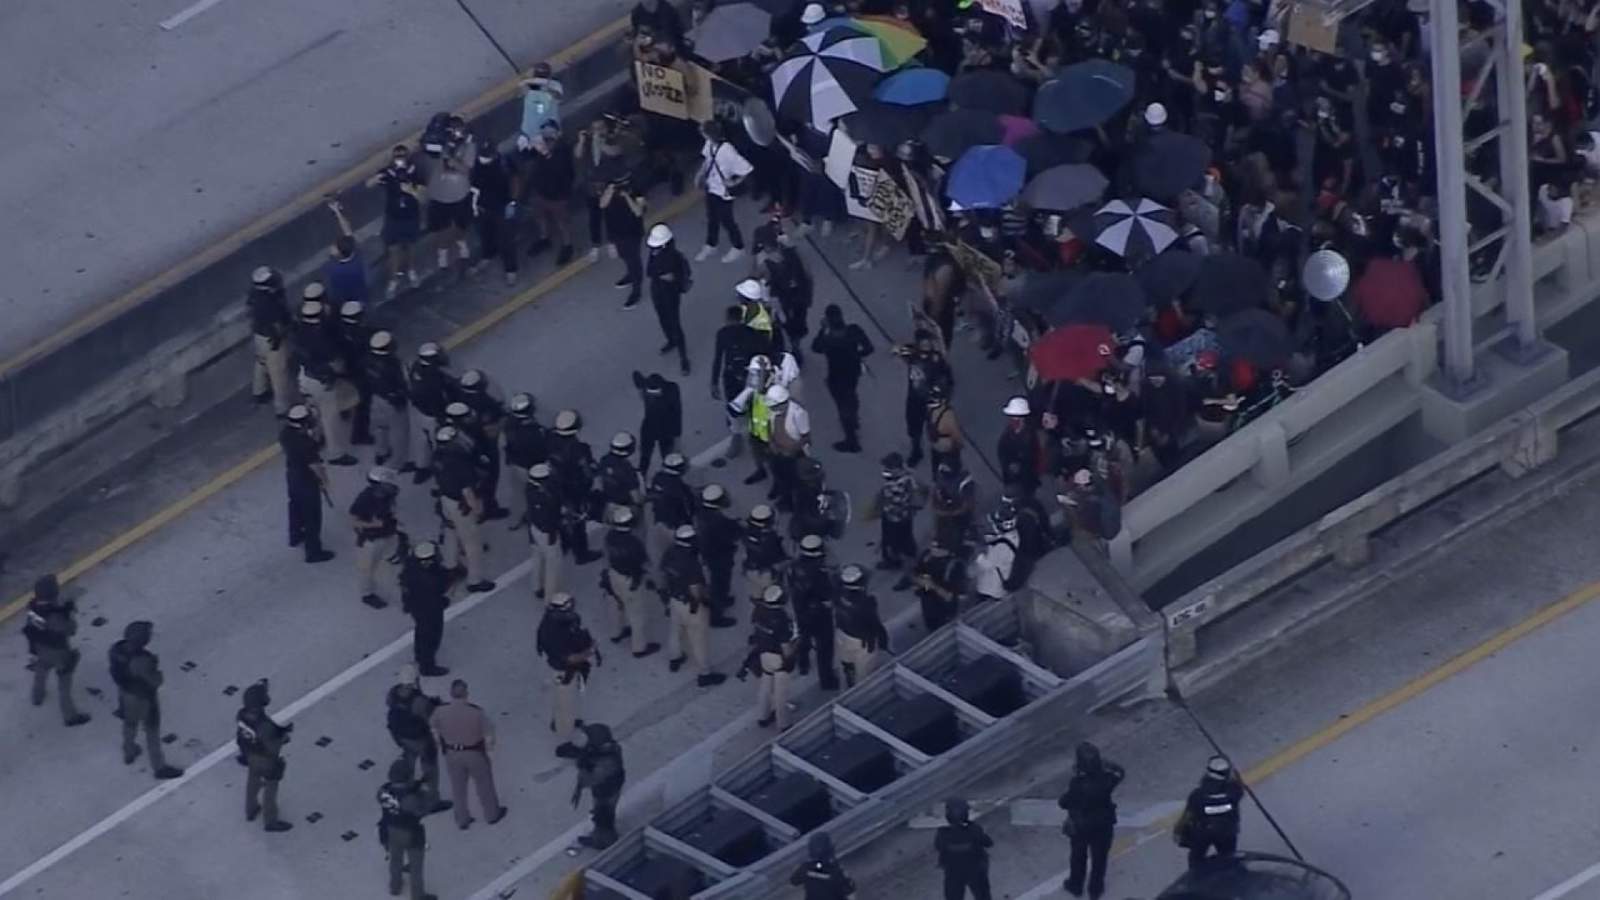 Downtown Miami protest disrupts traffic on I-95, I-395, Brickell, Biscayne